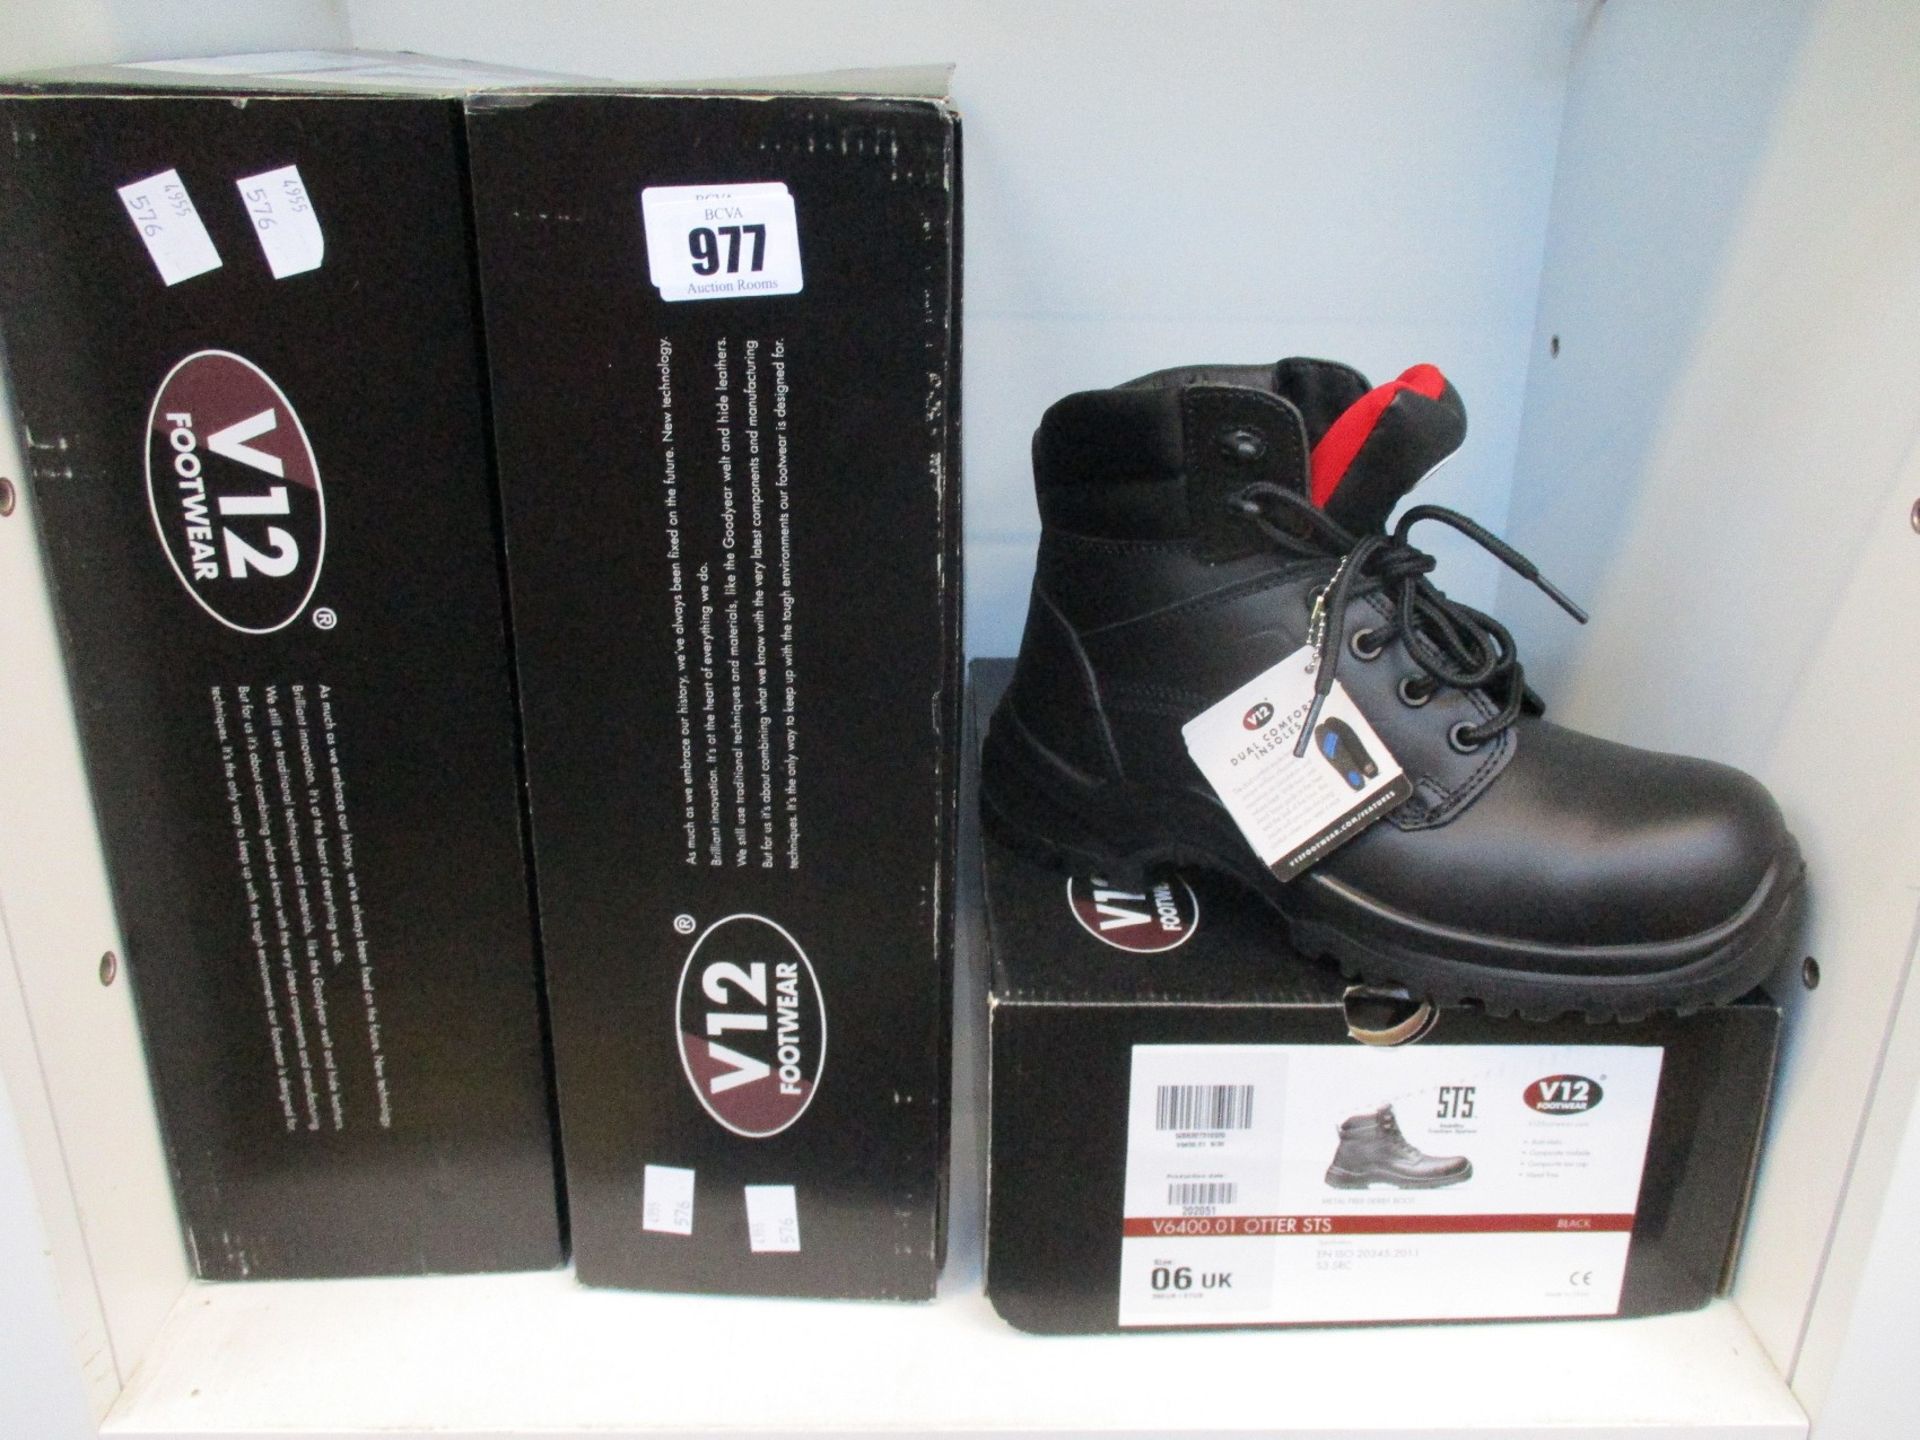 Three pairs of as new V12 Footwear metal free Derby work boots (1 x UK 6, 2 x UK 13).